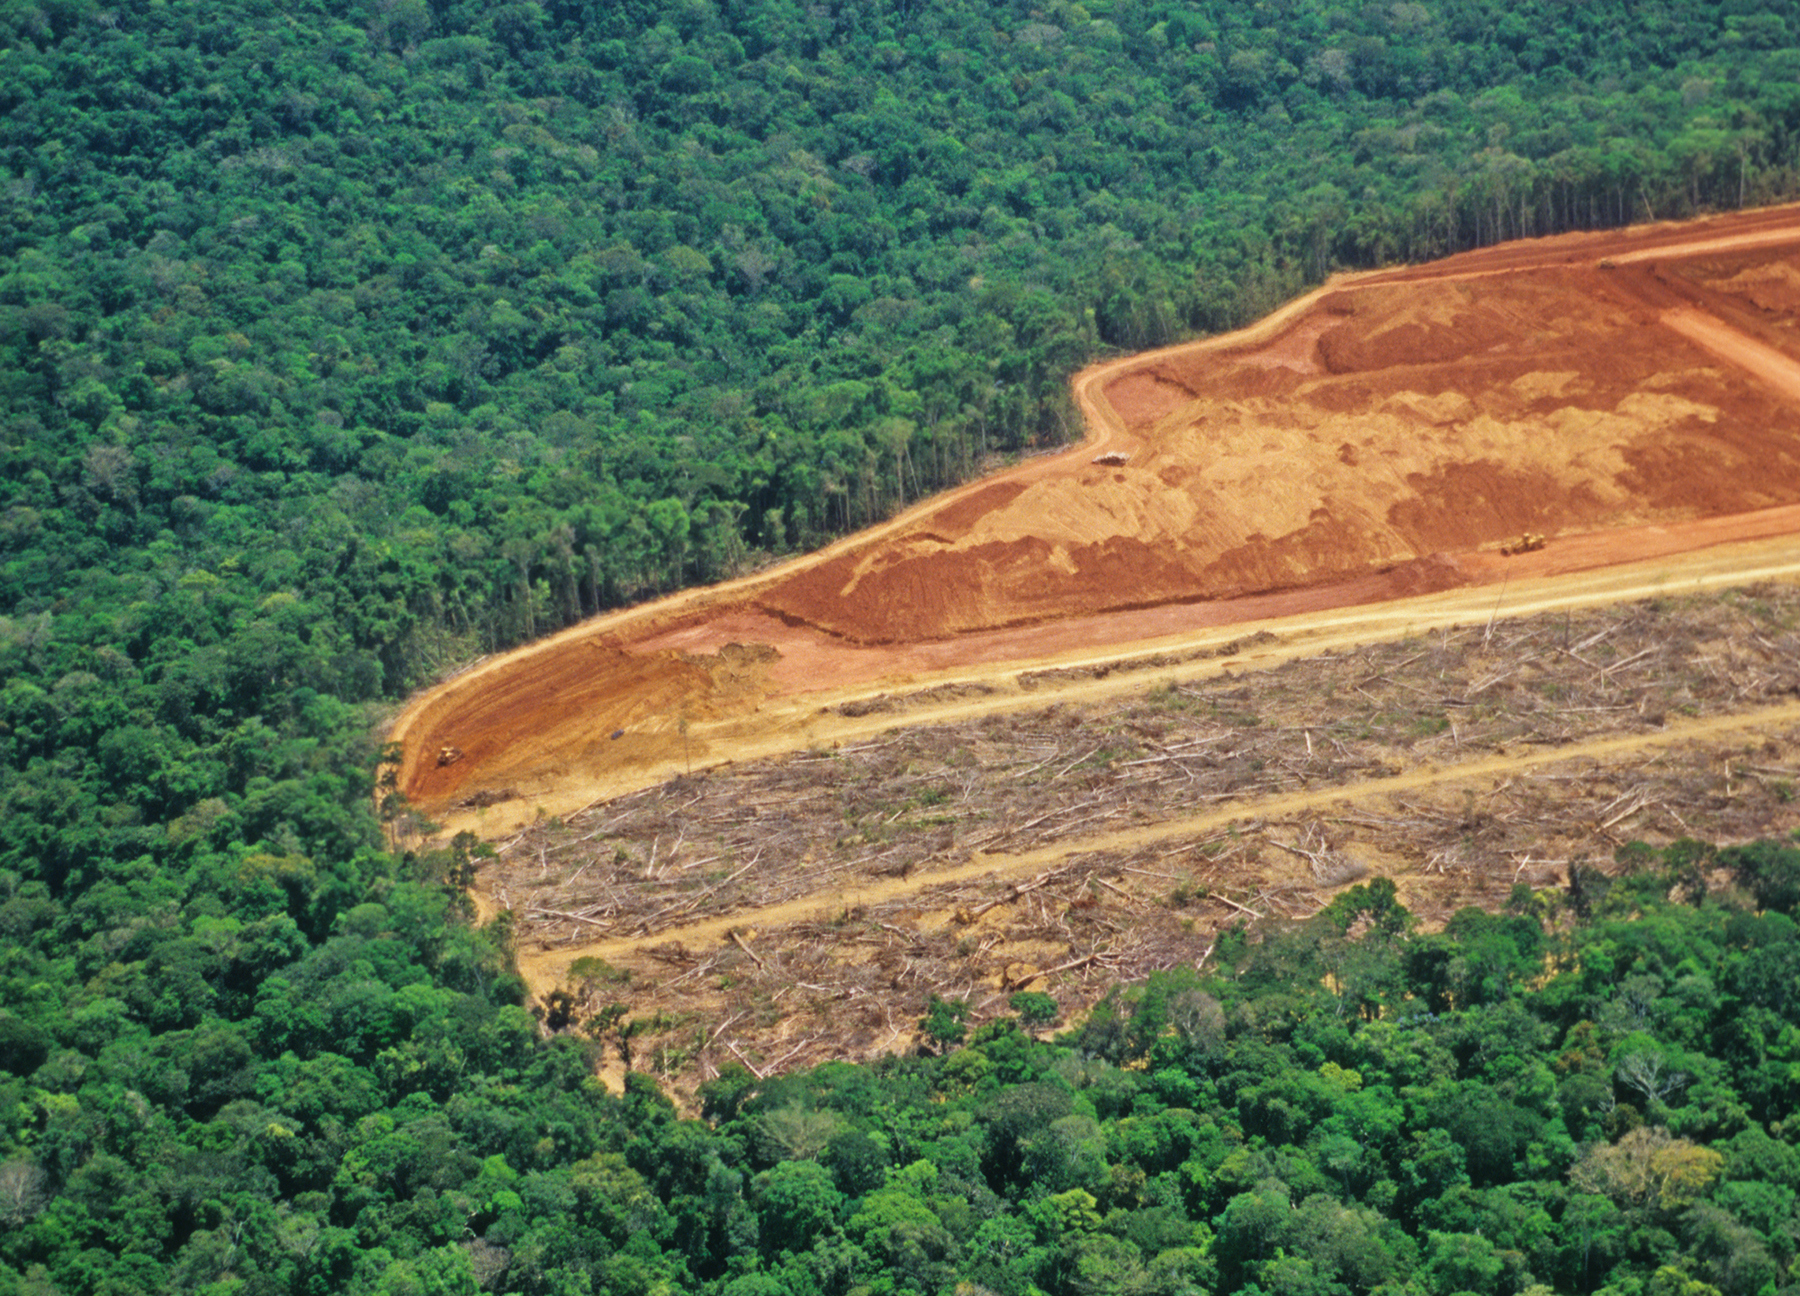 Aerial view showing a large, deforested patch cut into the vast Amazon rainforest